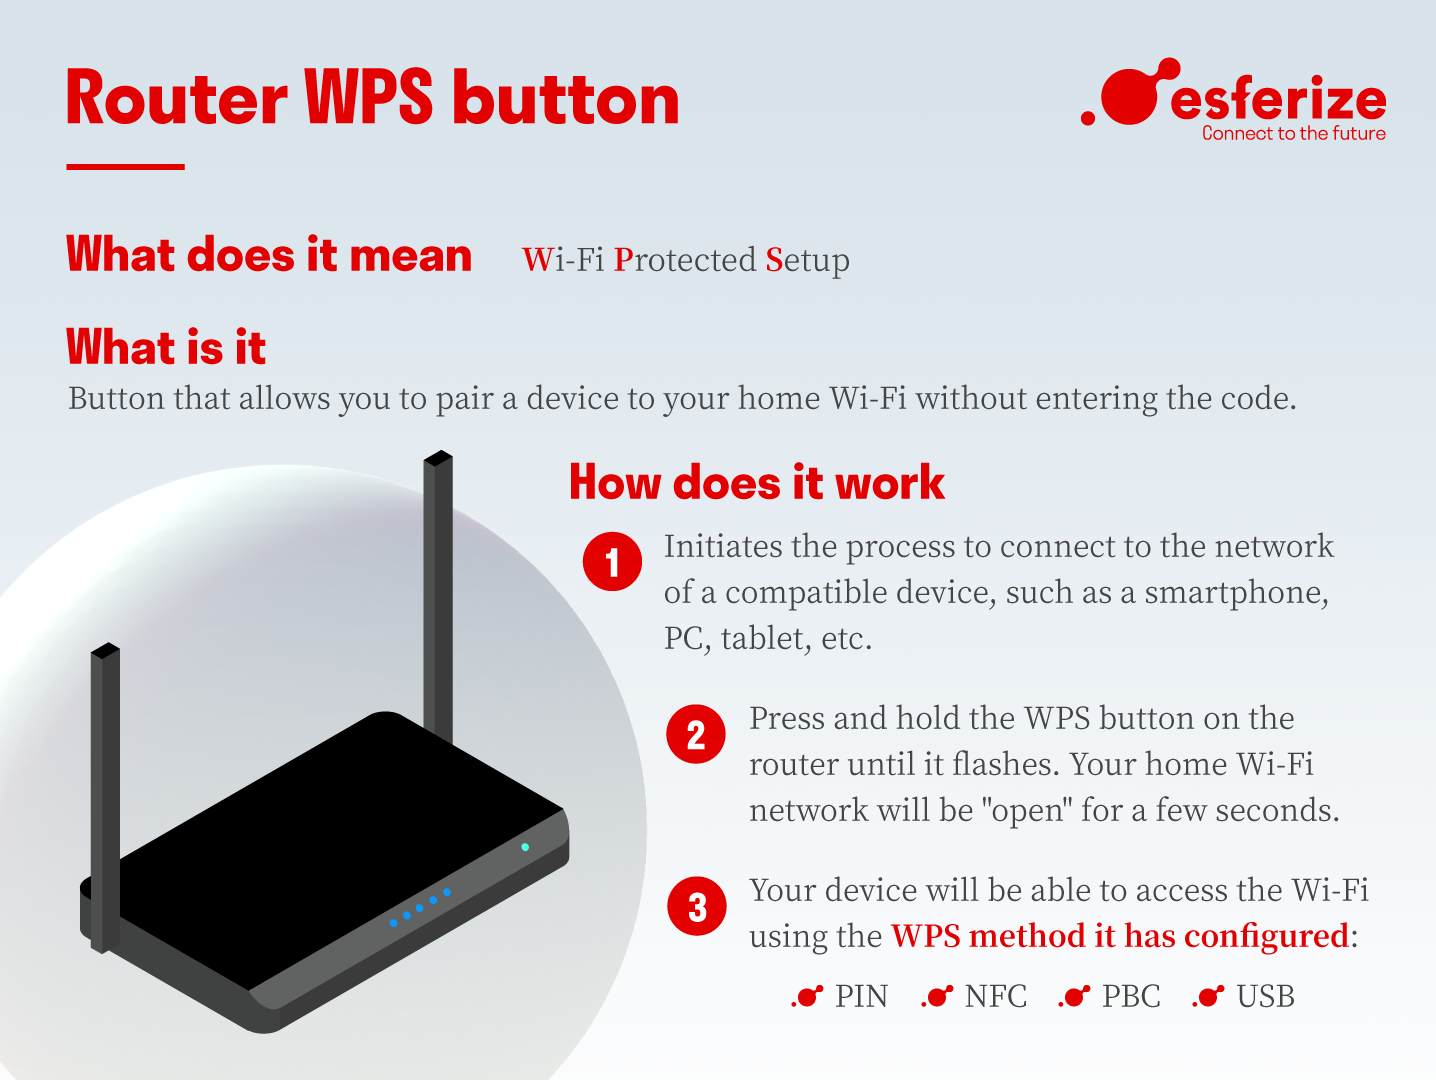 vidnesbyrd forklædning Huddle This year's best Wi-Fi encryption and how to set it up on your router